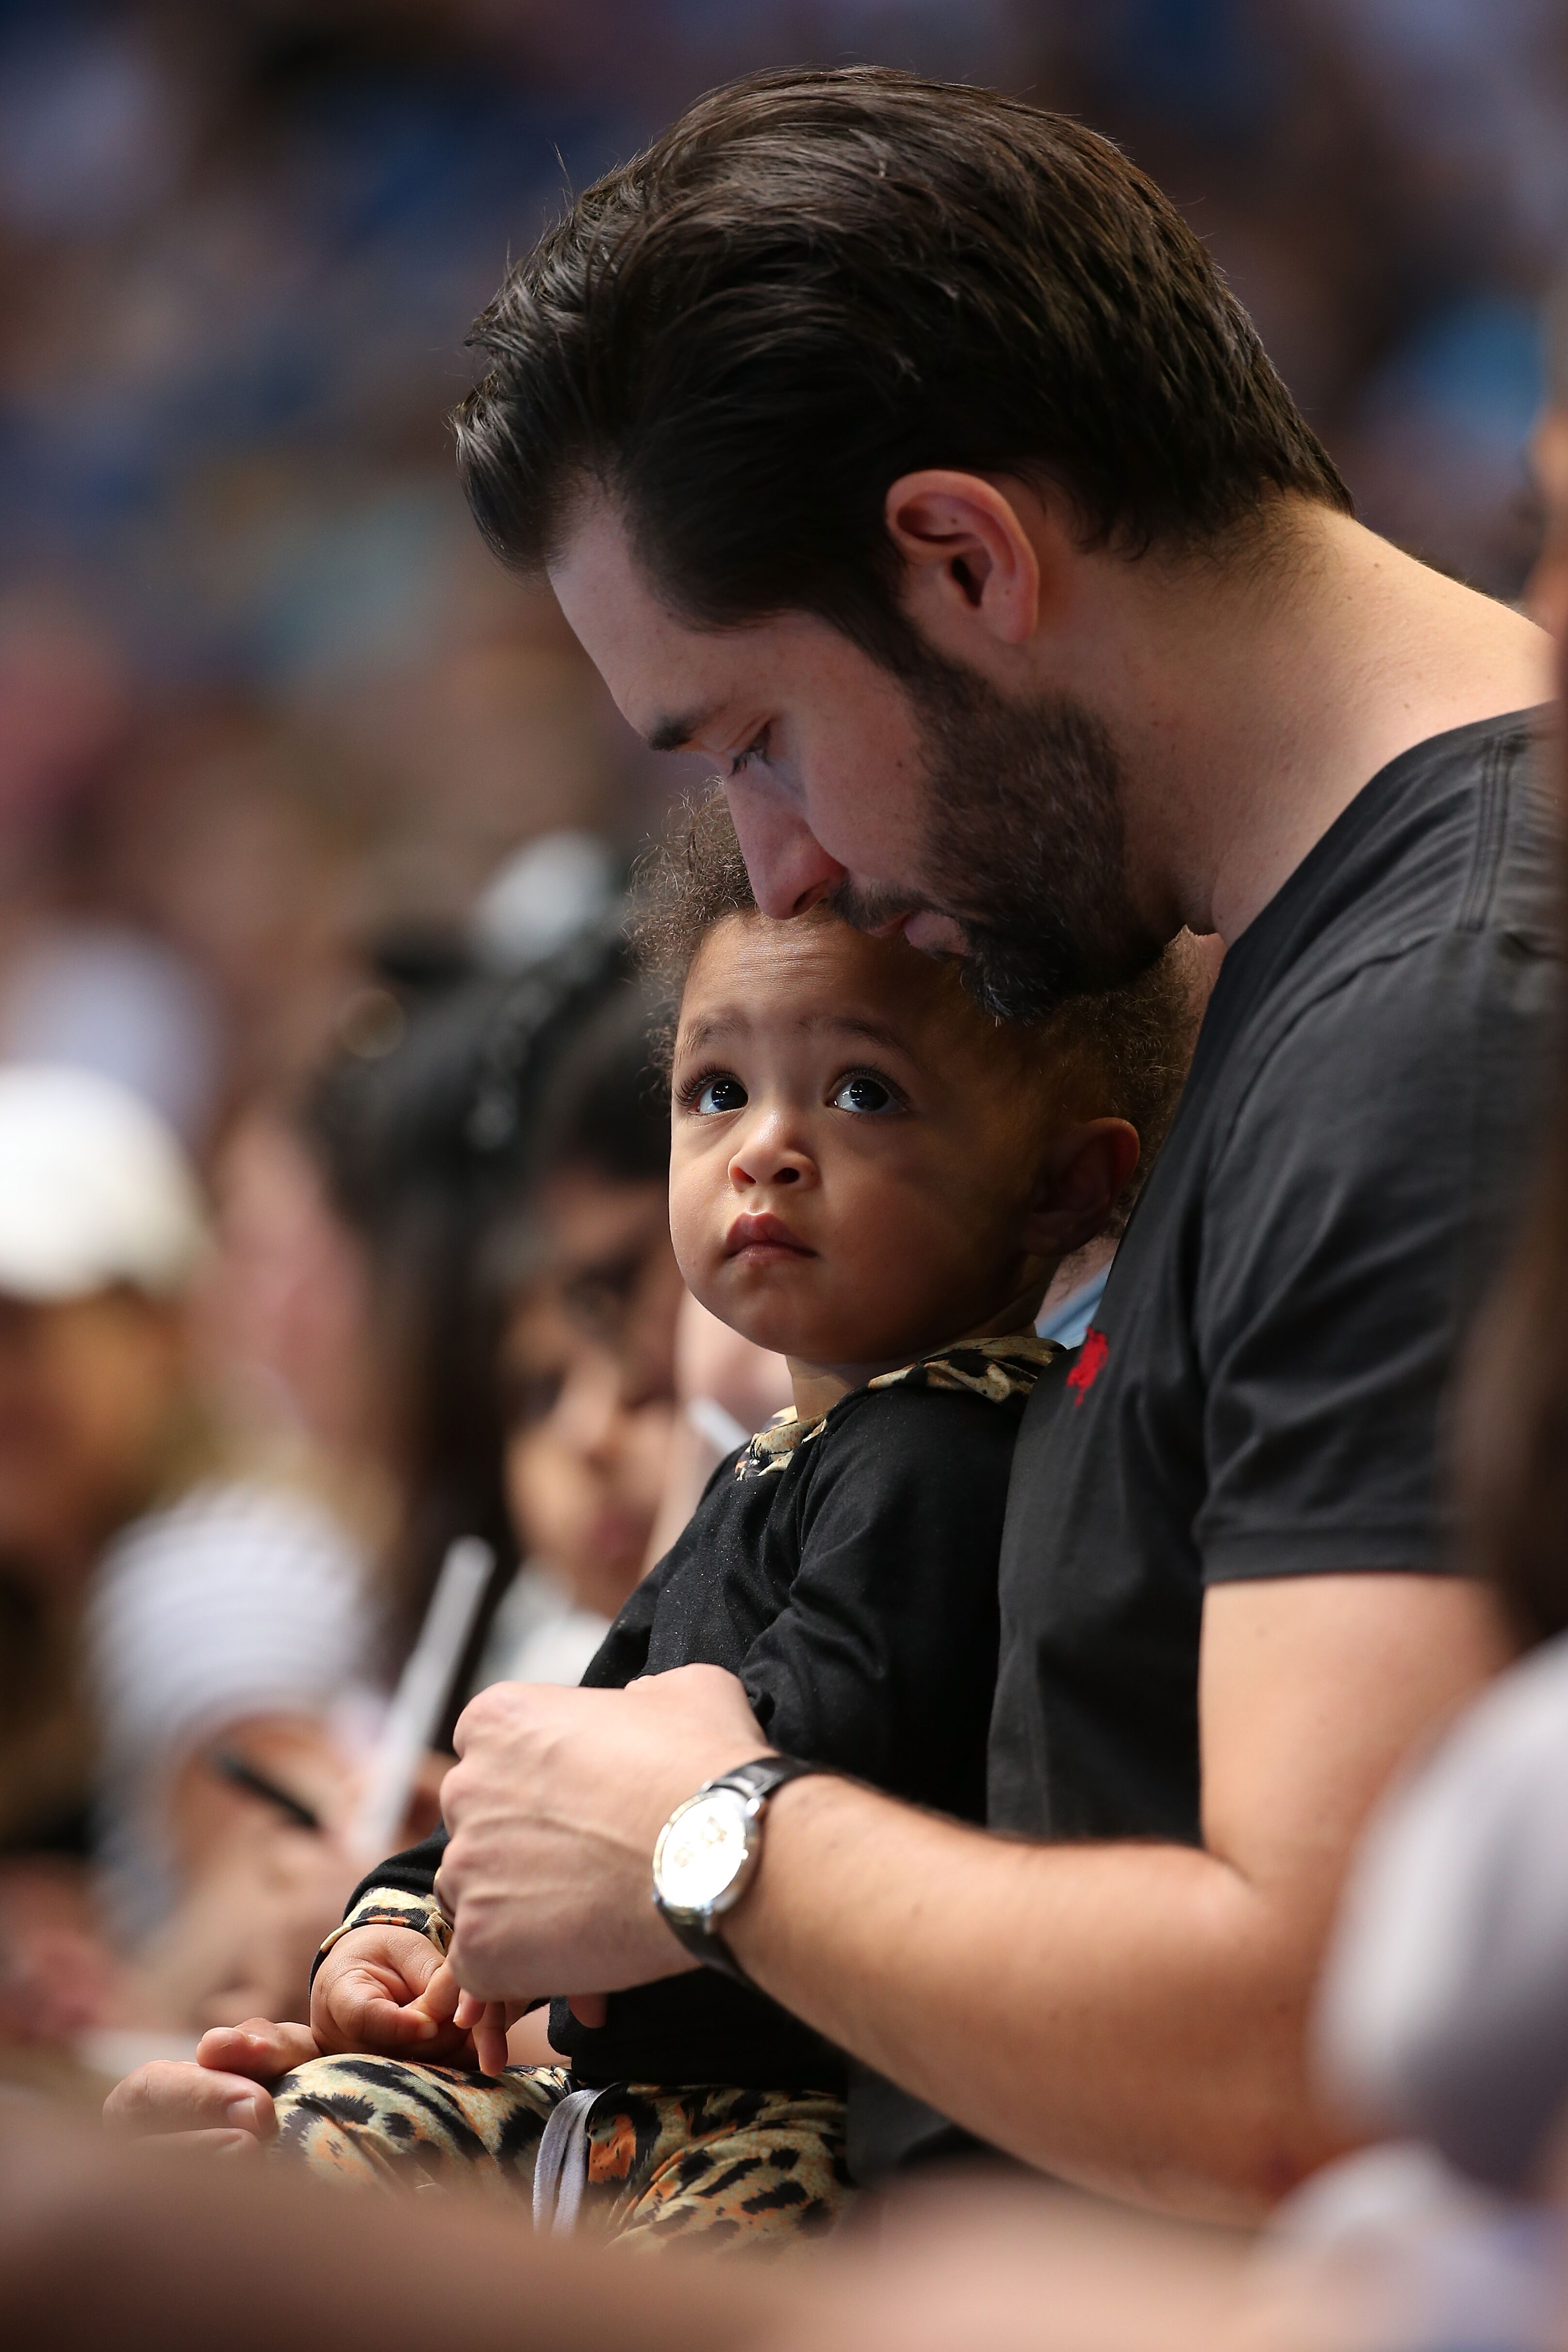  Serena Williams' husband Alexis Ohanian with their daughter Alexis Olympia Ohanian Jr. at RAC Arena on January 03, 2019 | Photo: Getty Images